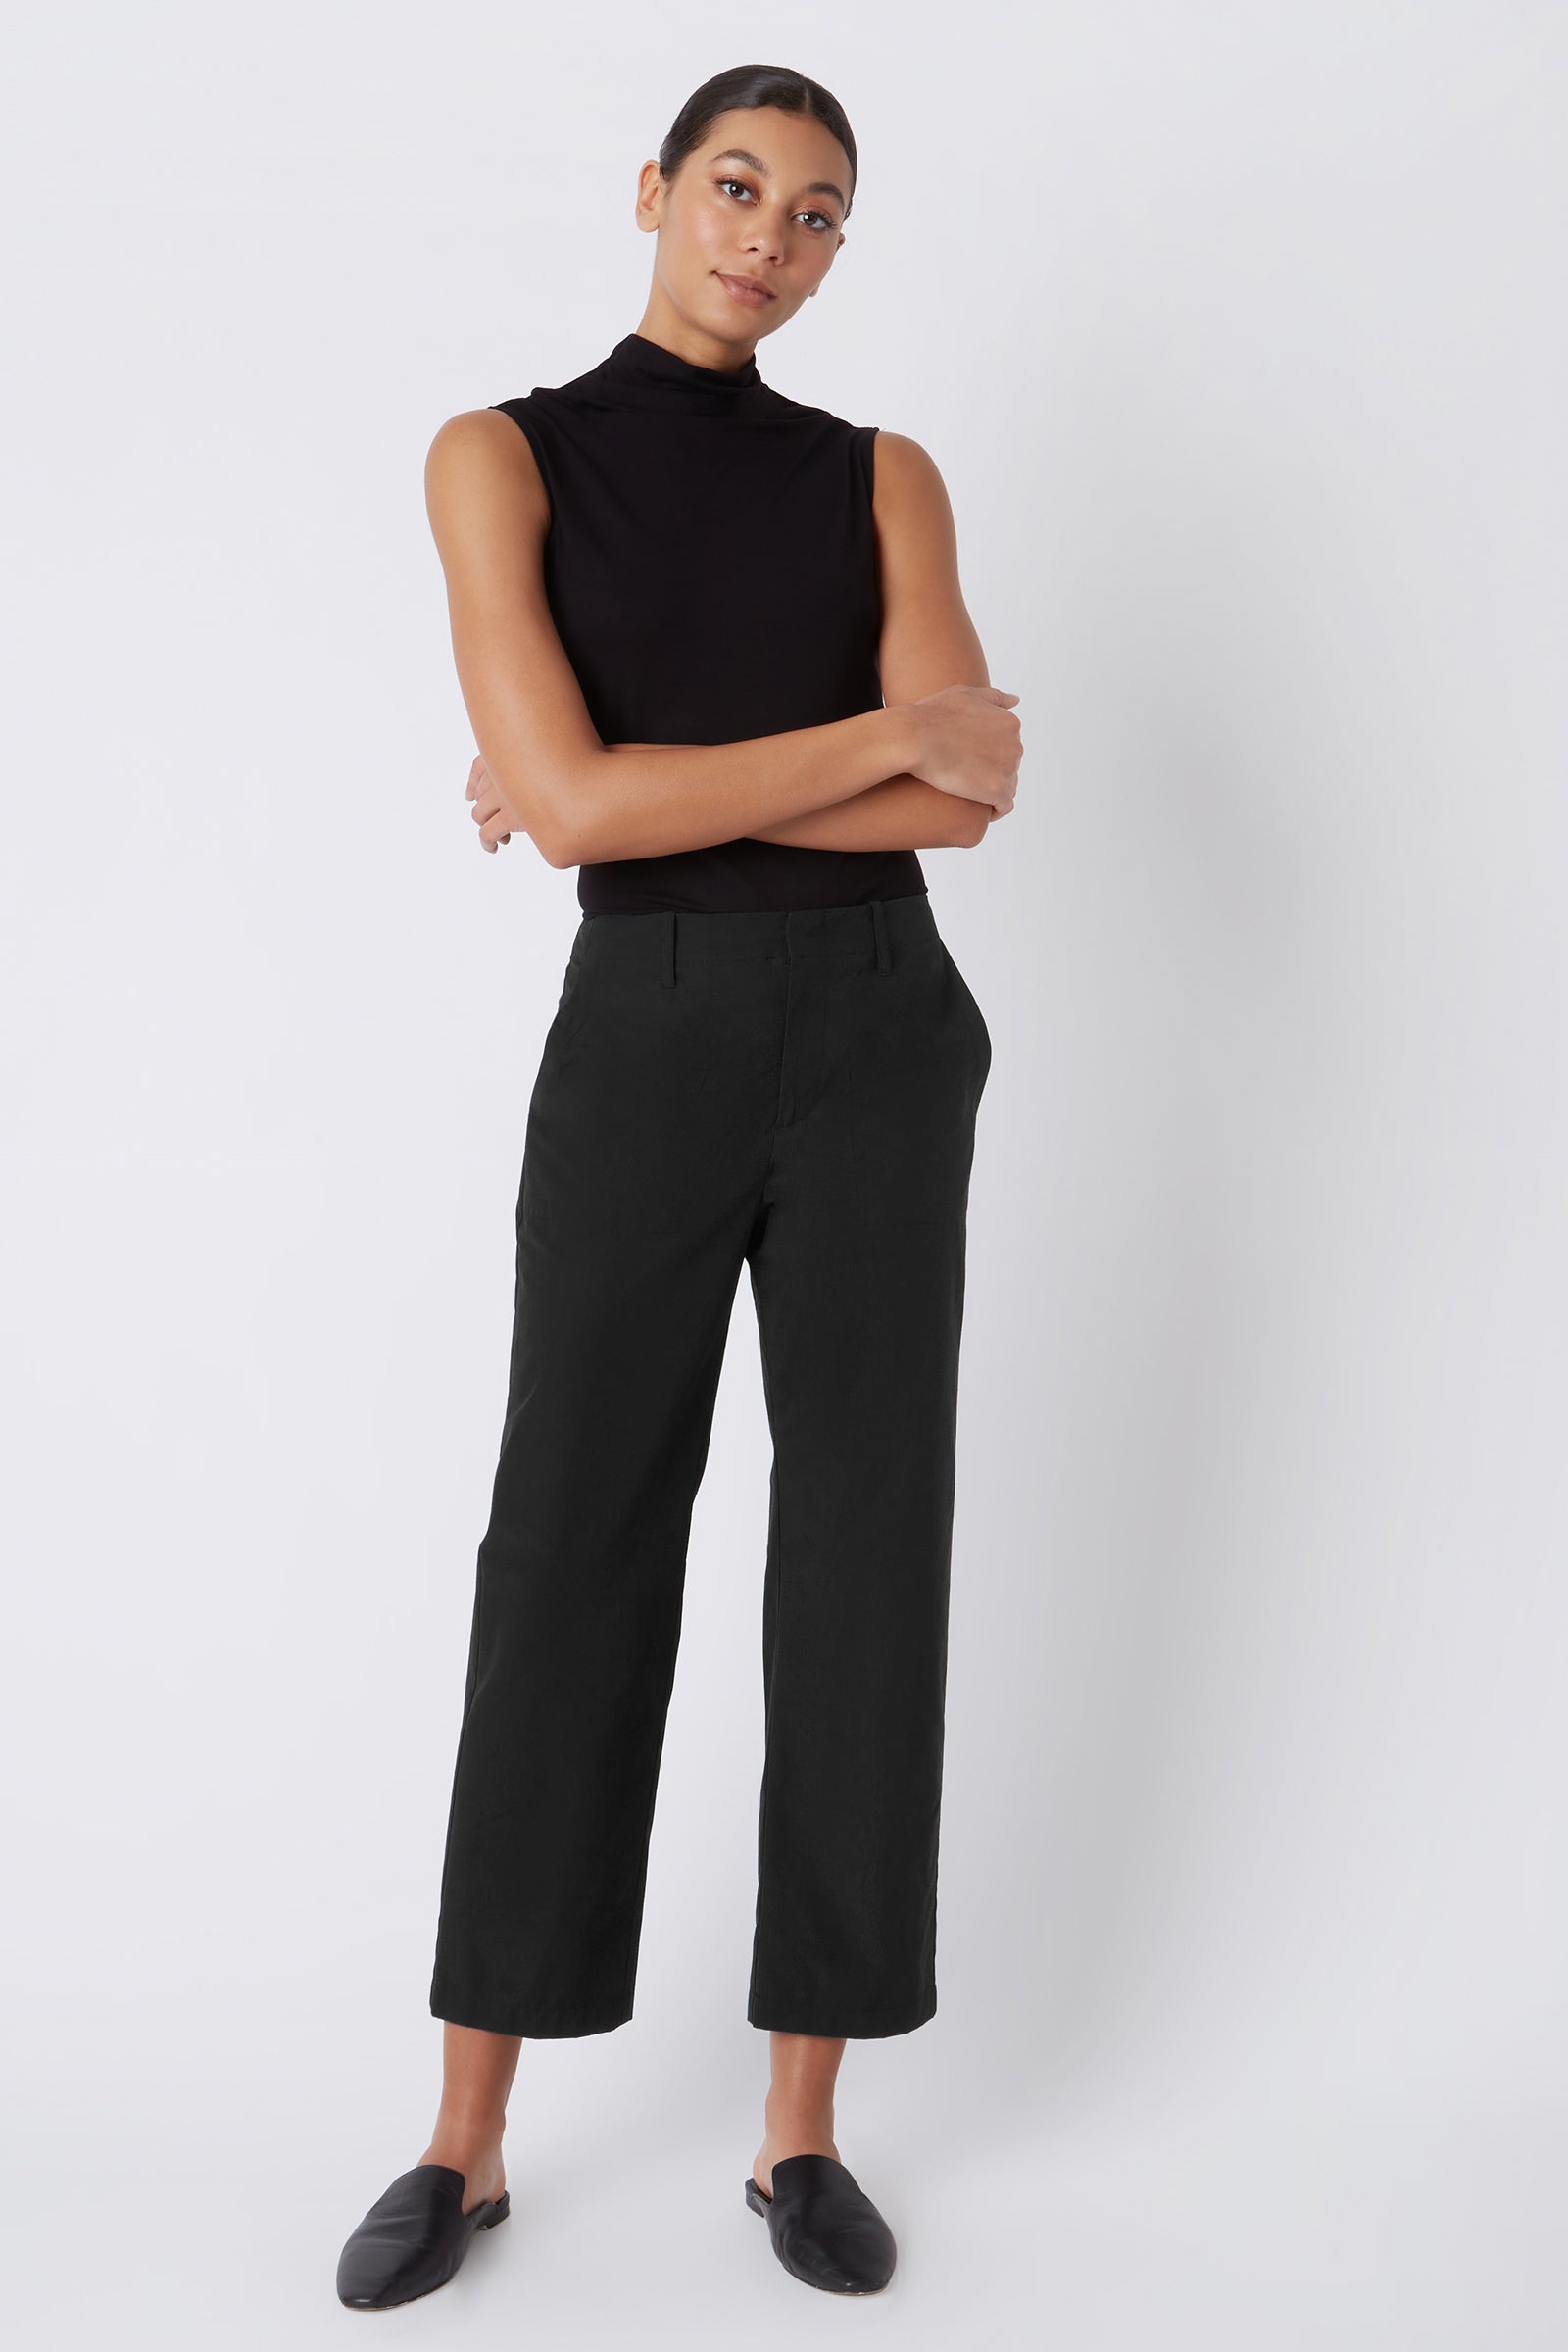 Kal Rieman Francoise Cigarette Pant in Black on Model with Arms Crossed Full Front View